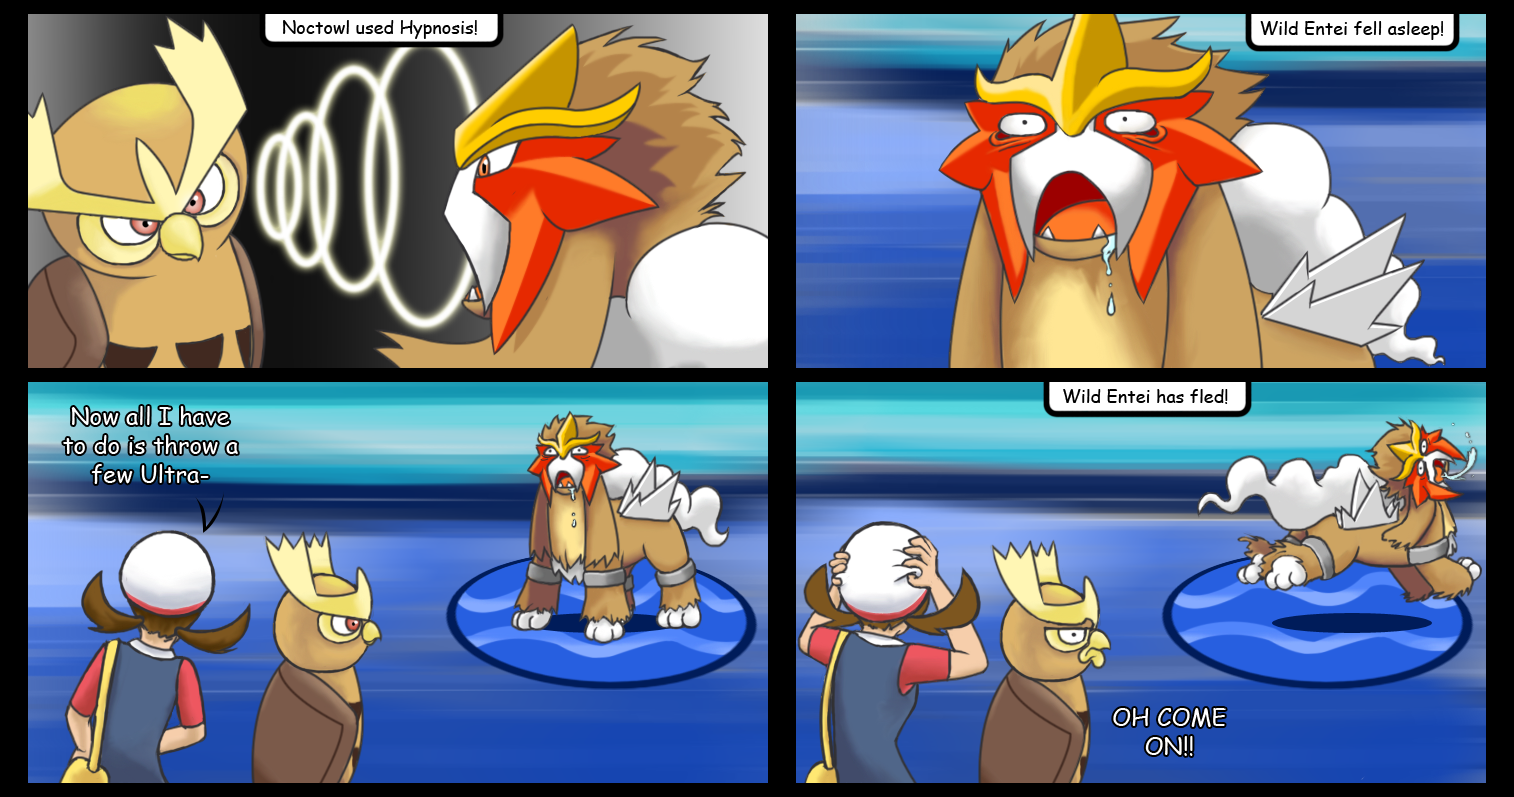 RE: Funny Pokemon comics. pokefan you know we don't allow the F word so i